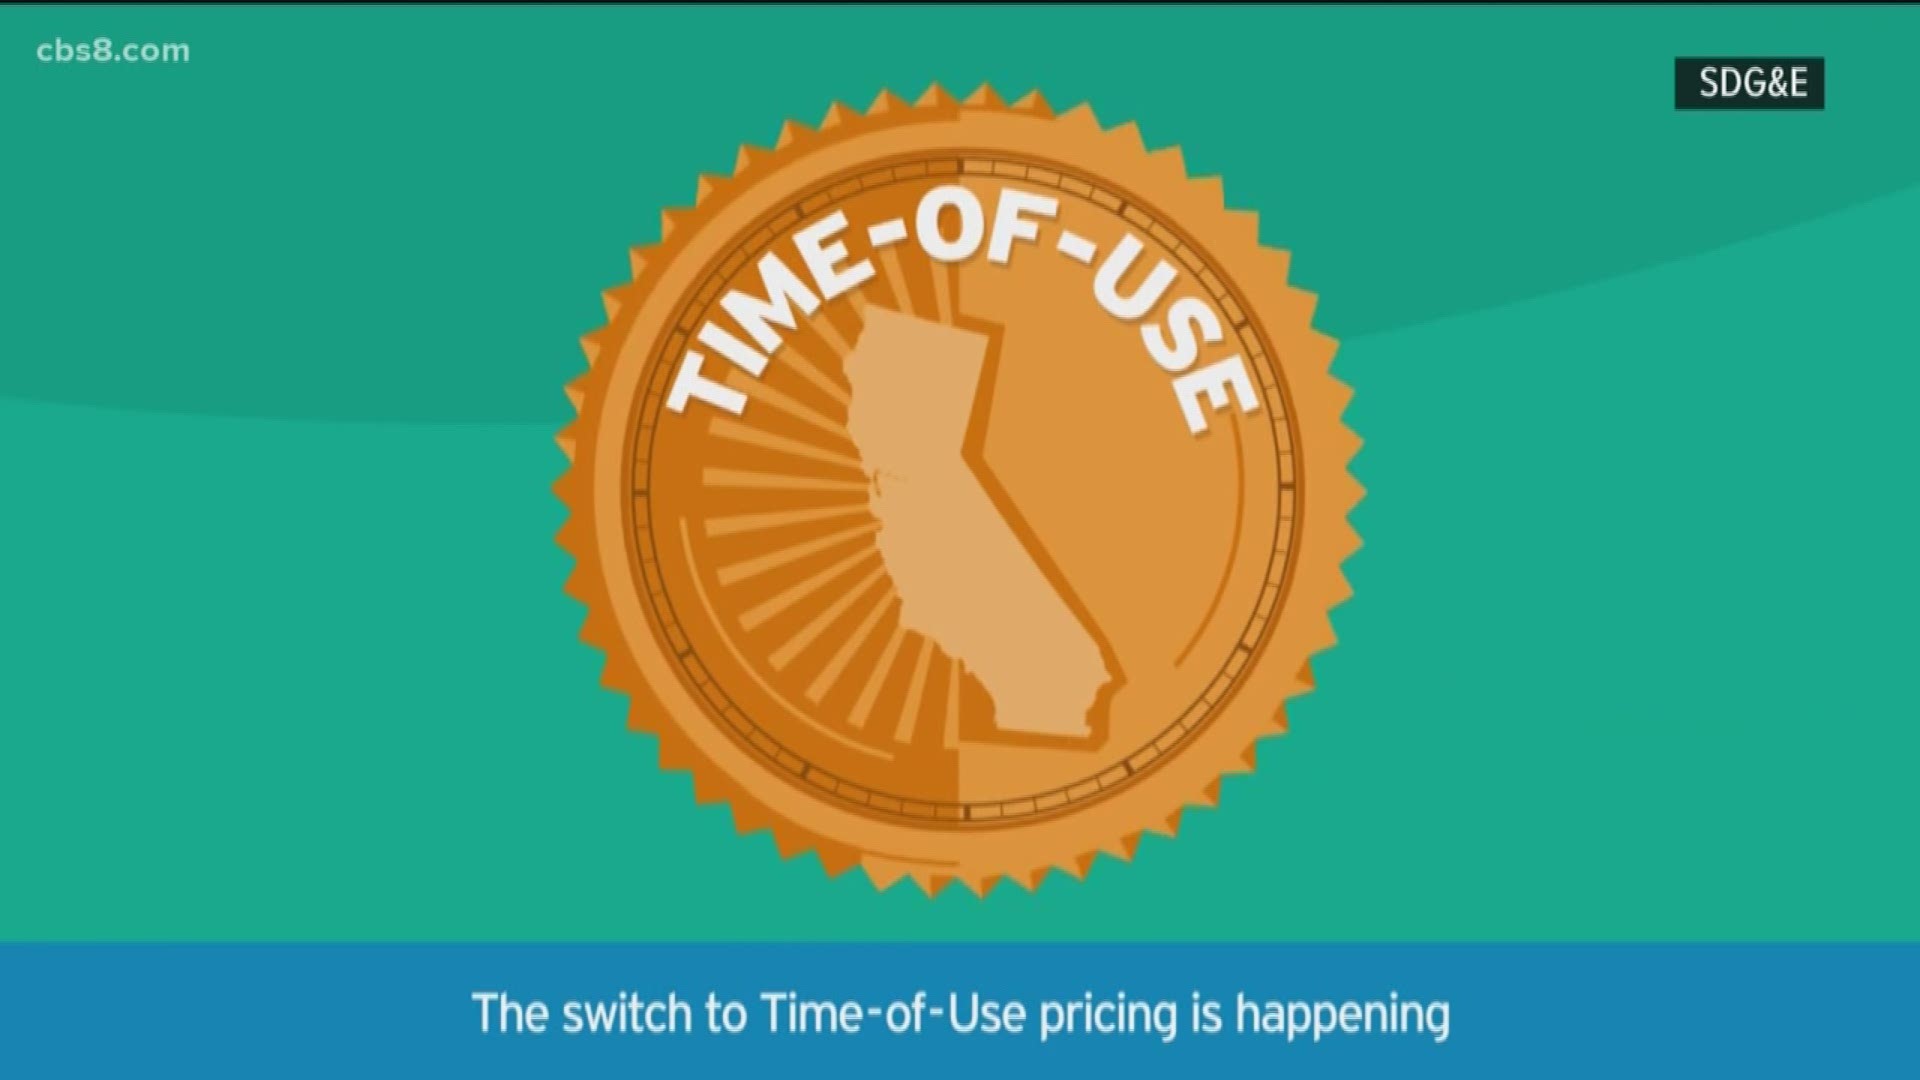 With the new time-of-use pricing plans, SDG&E’s peak pricing comes between 4 and 9 p.m.